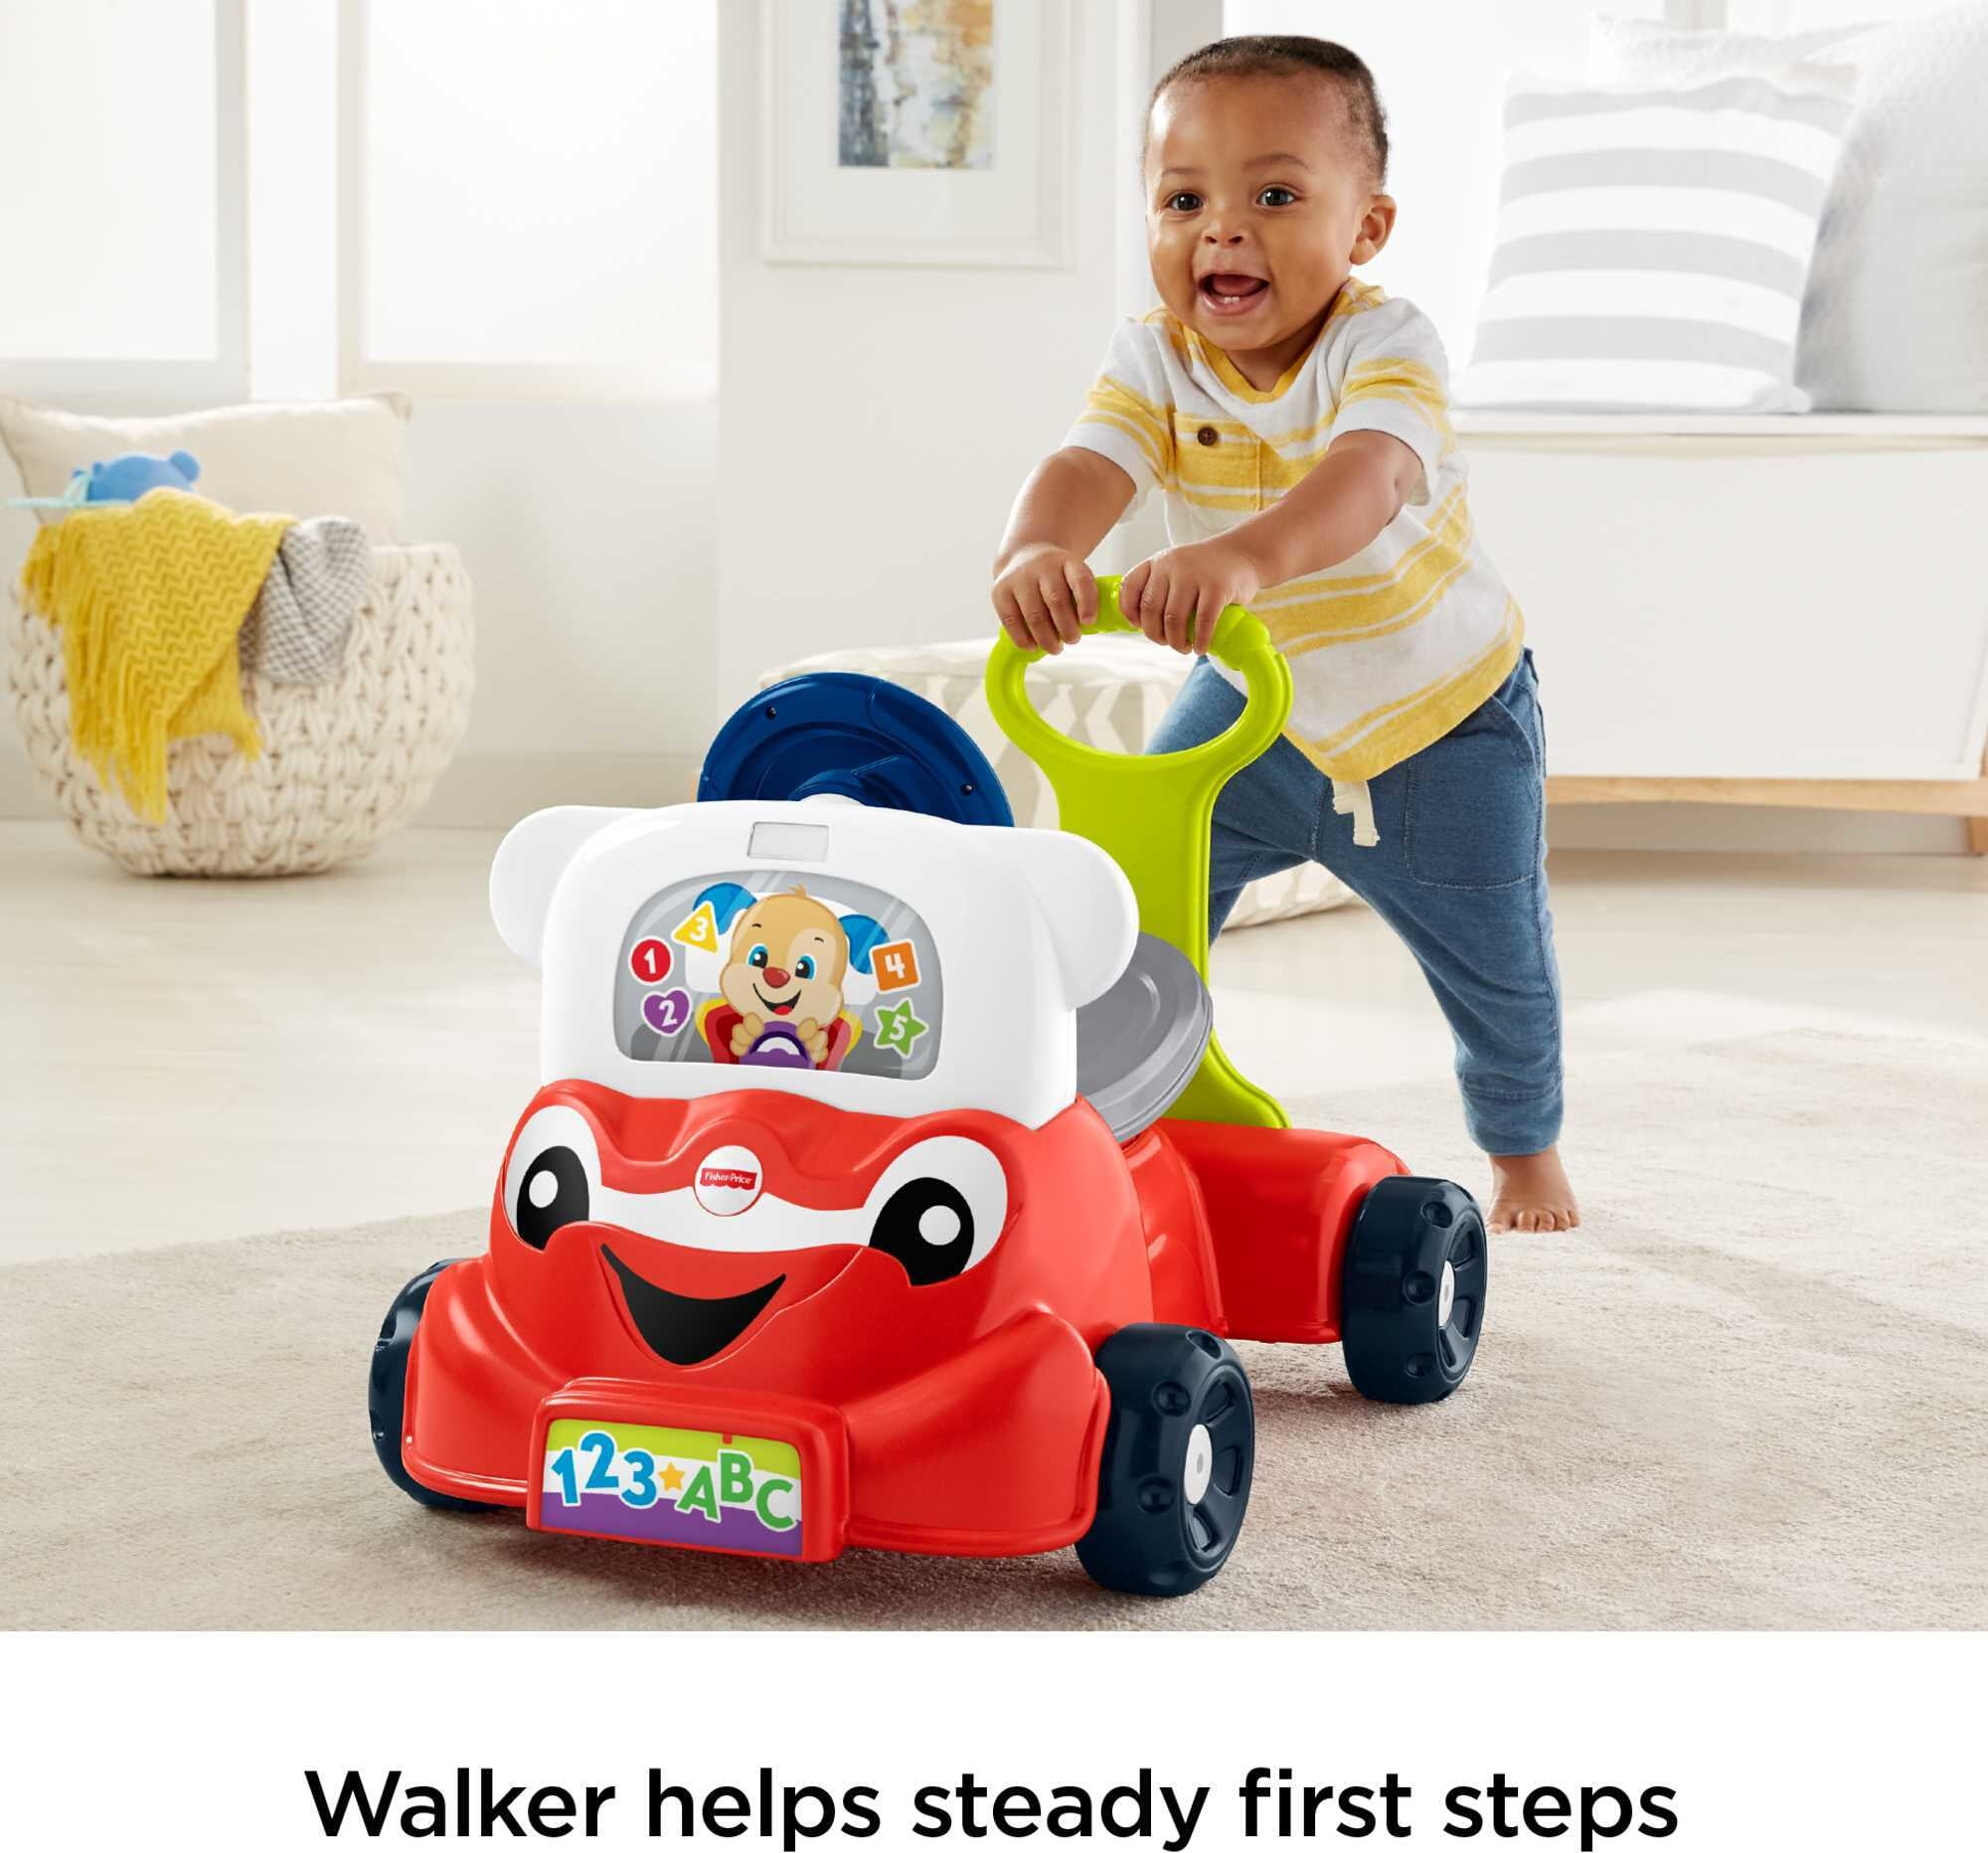 Fisher-Price Laugh & Learn 3-in-1 Smart Car, Interactive Baby Ride-On Toy - 2